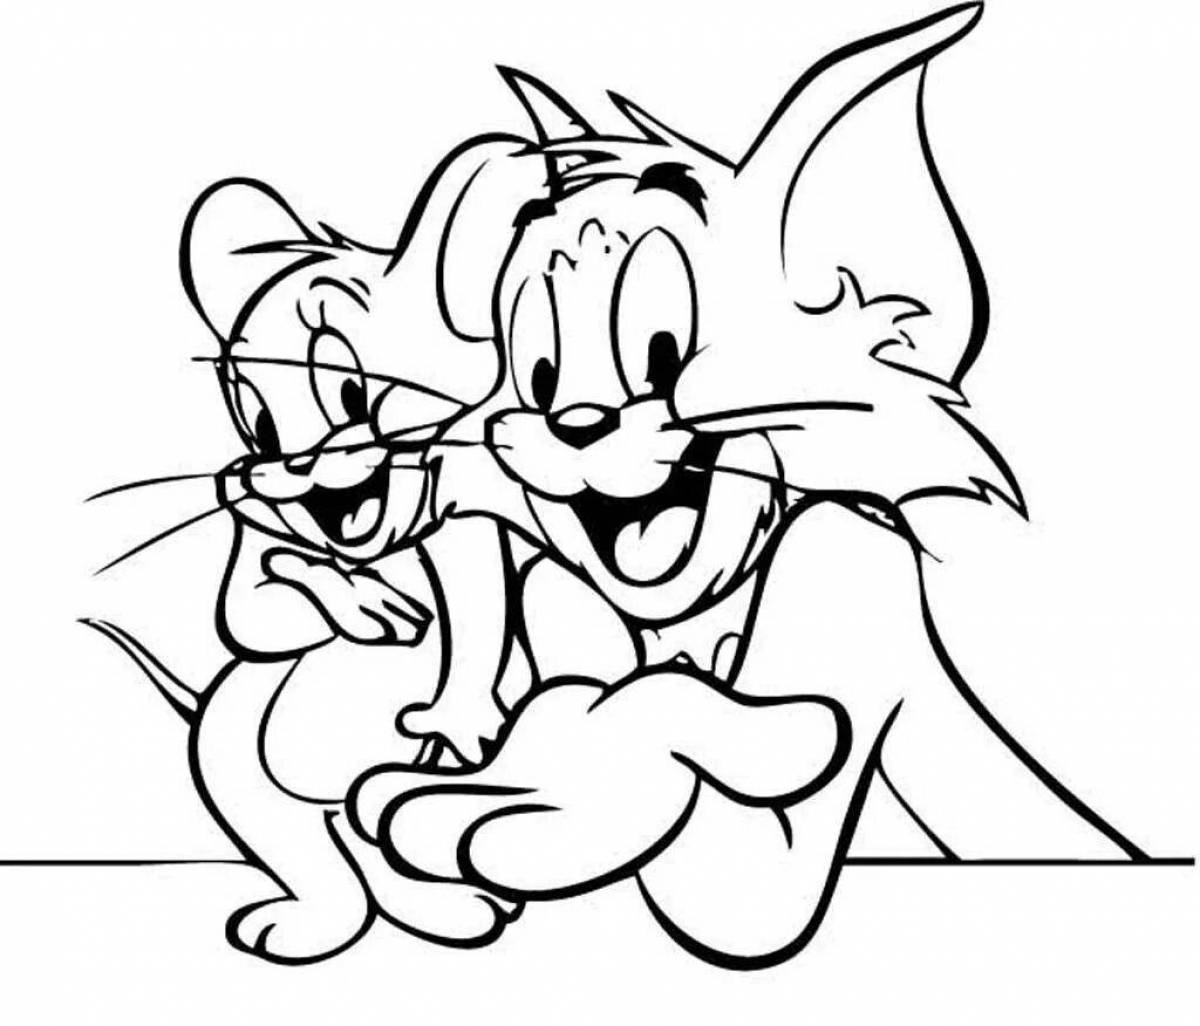 Coloring tom and jerry in bright colors